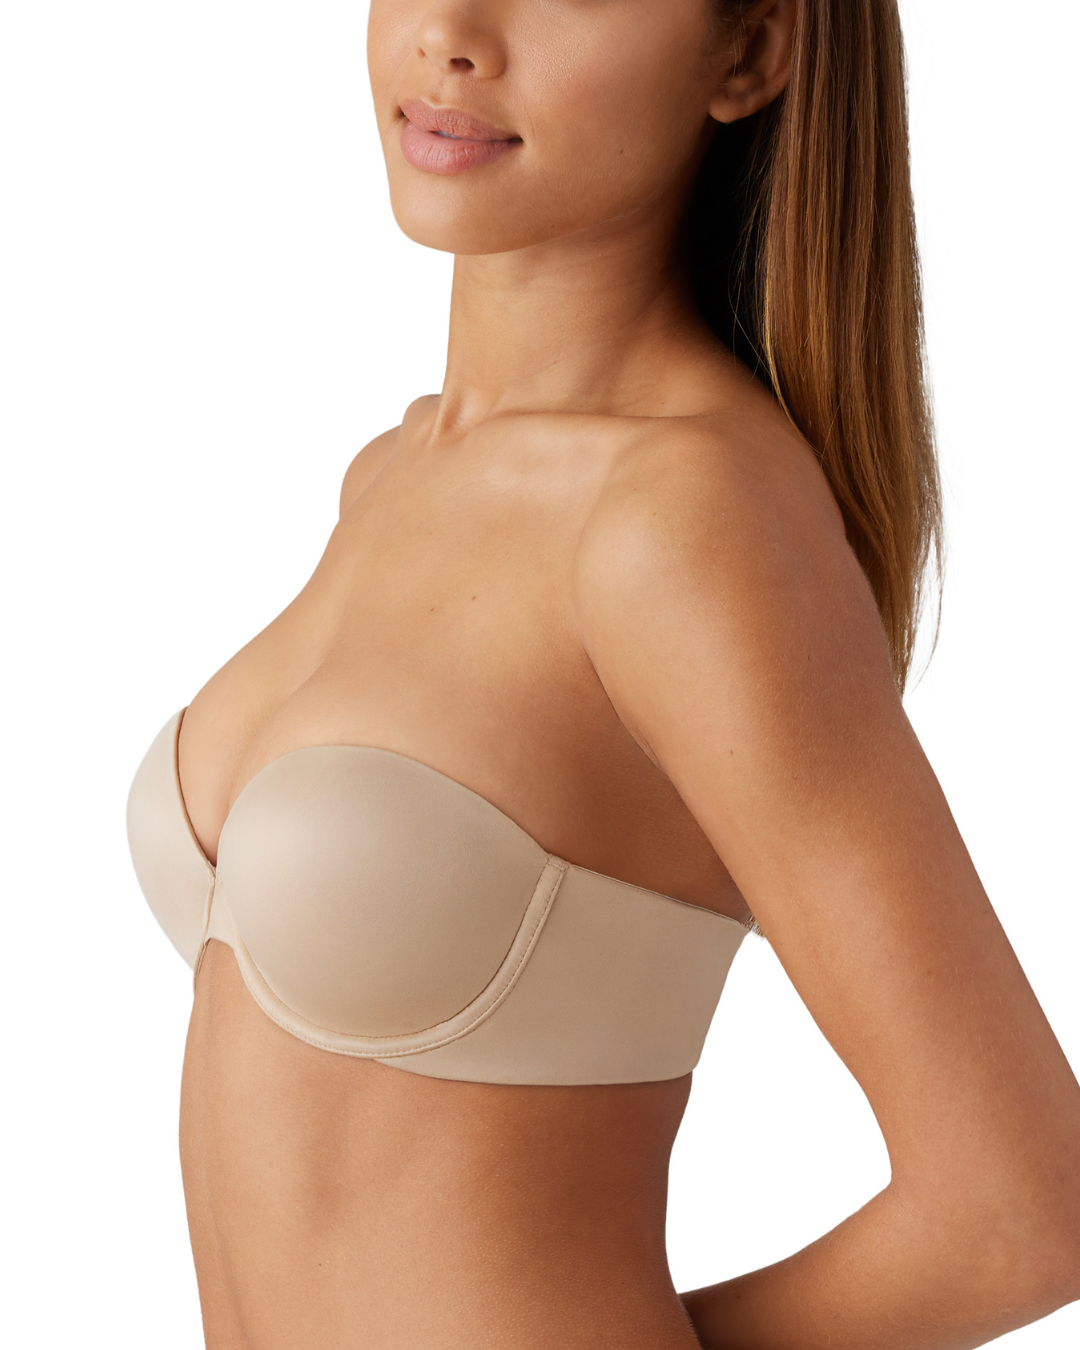 Model wearing a molded strapless underwire bra with hook and eye closure and convertible straps in nude